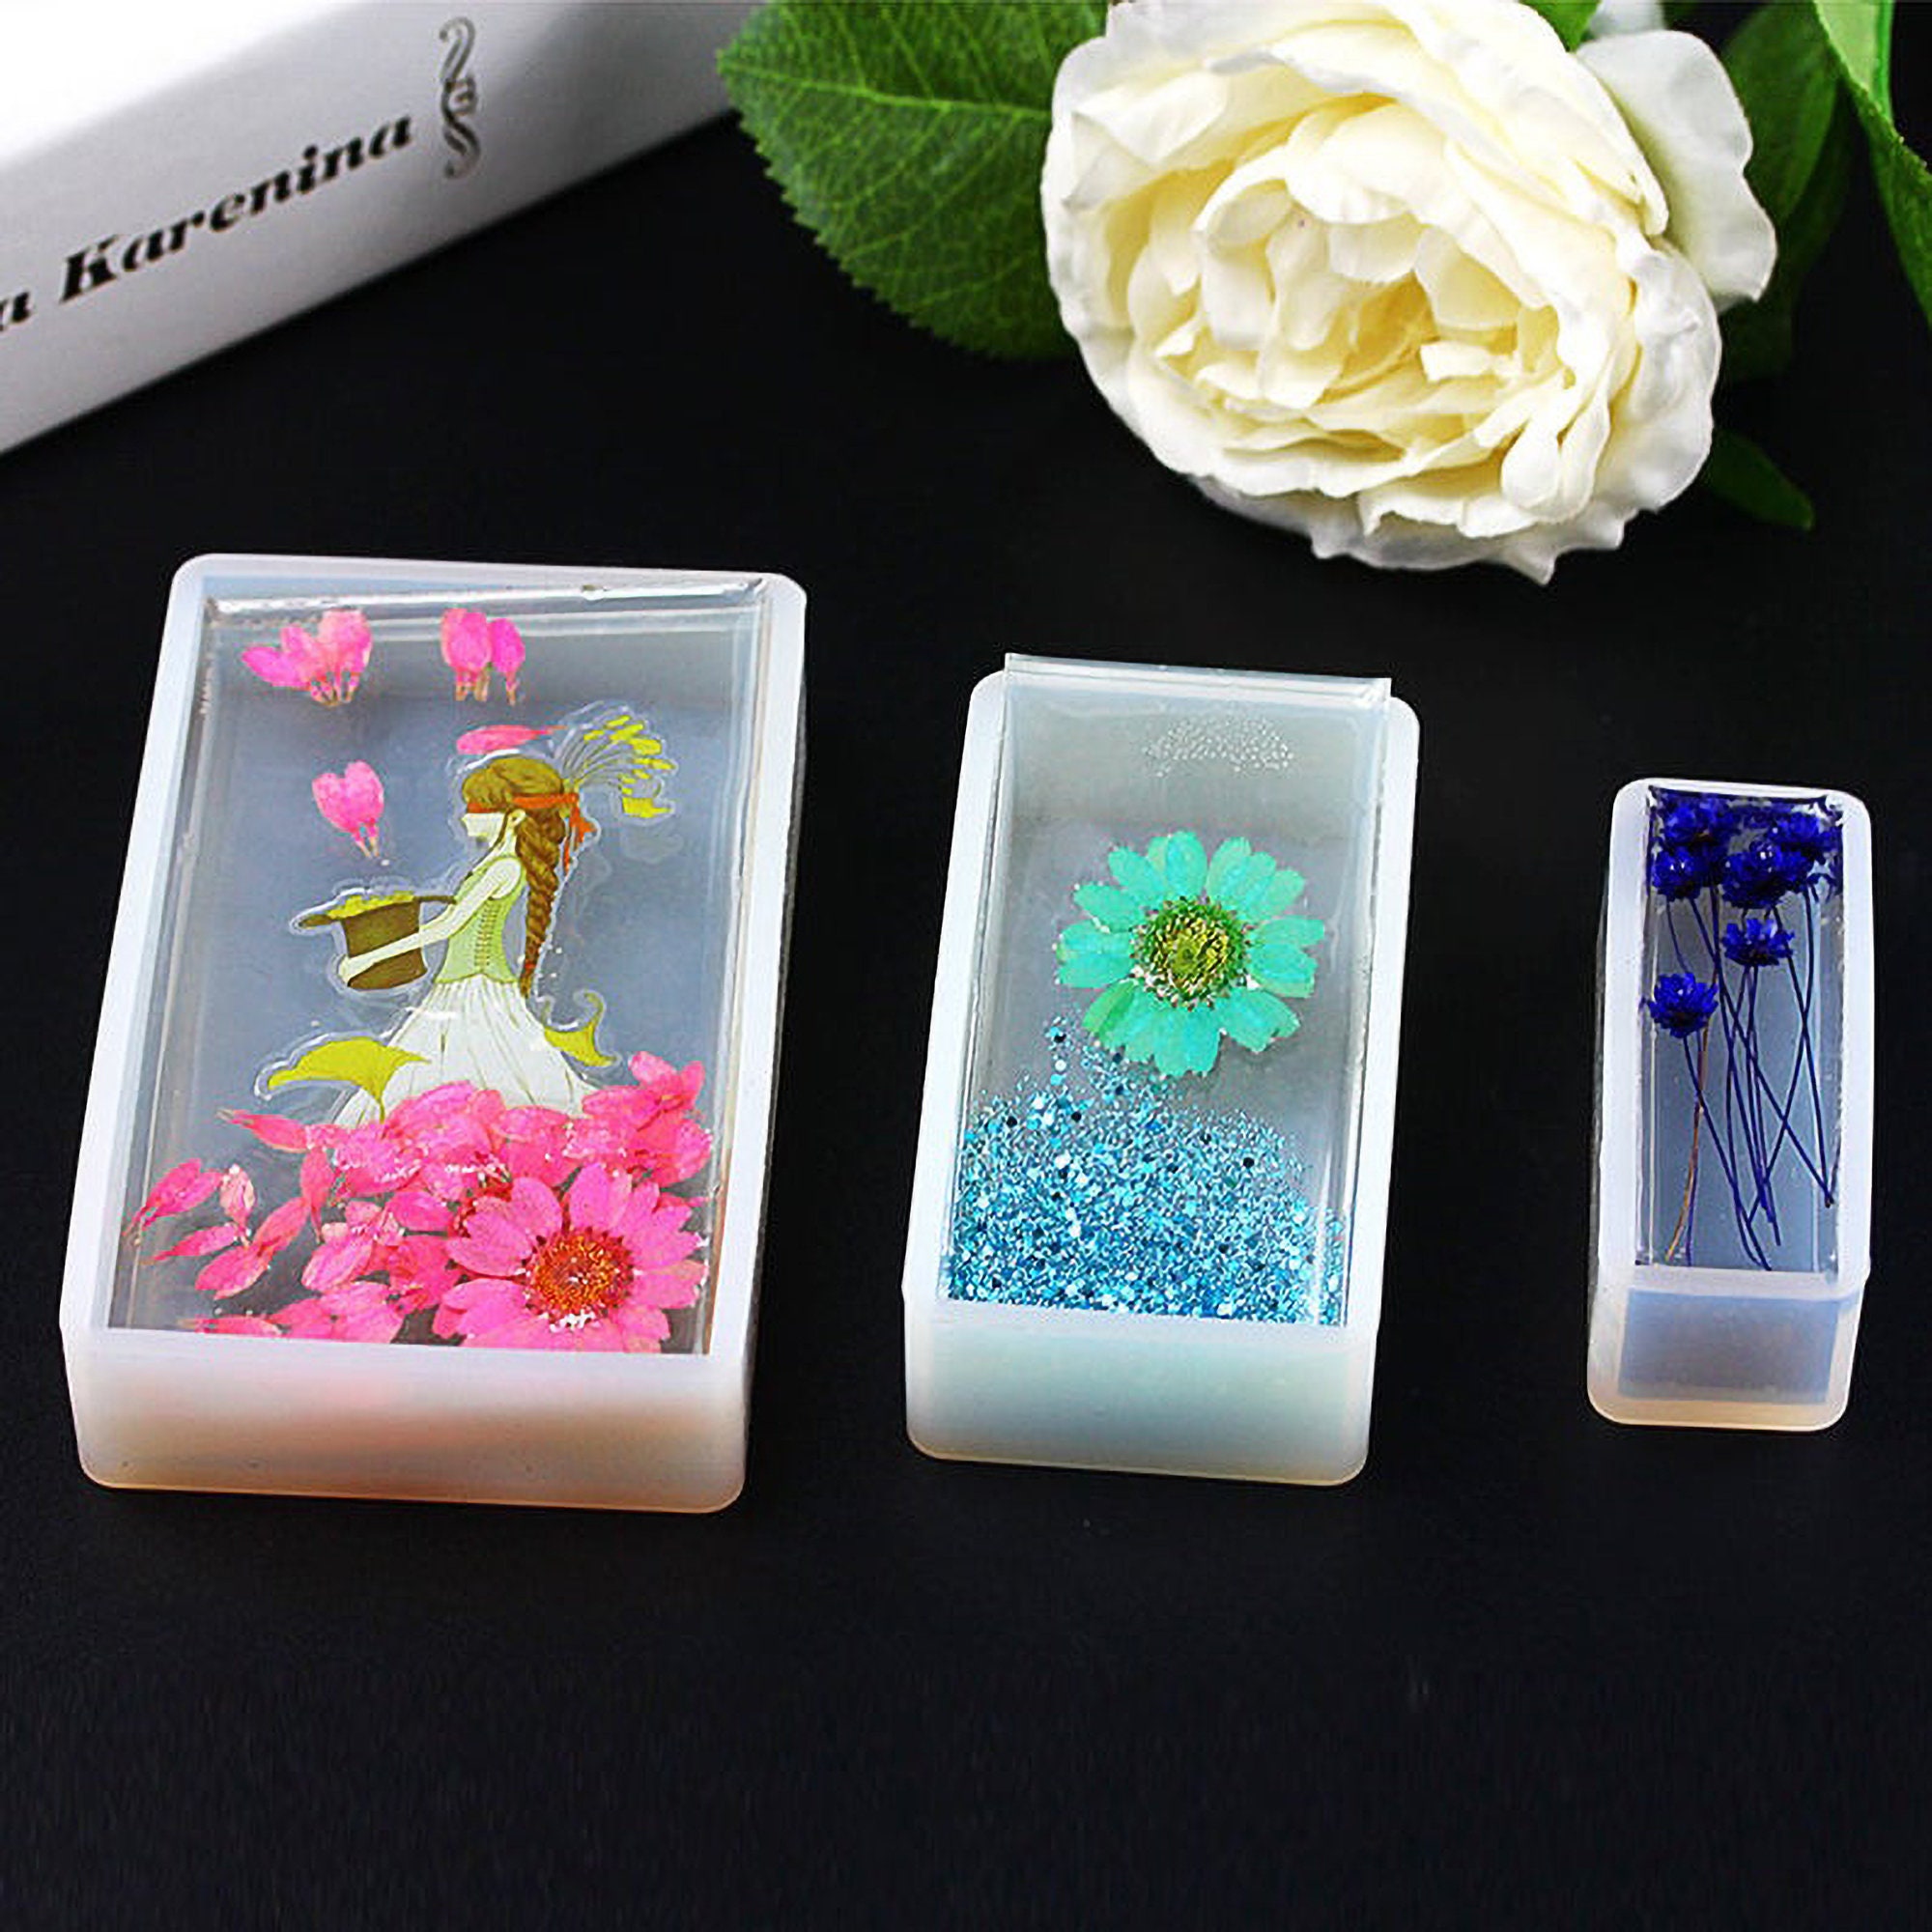 5Pcs Square Cube Silicone Mould Epoxy Resin Molds DIY Pendants Making Craft  B620